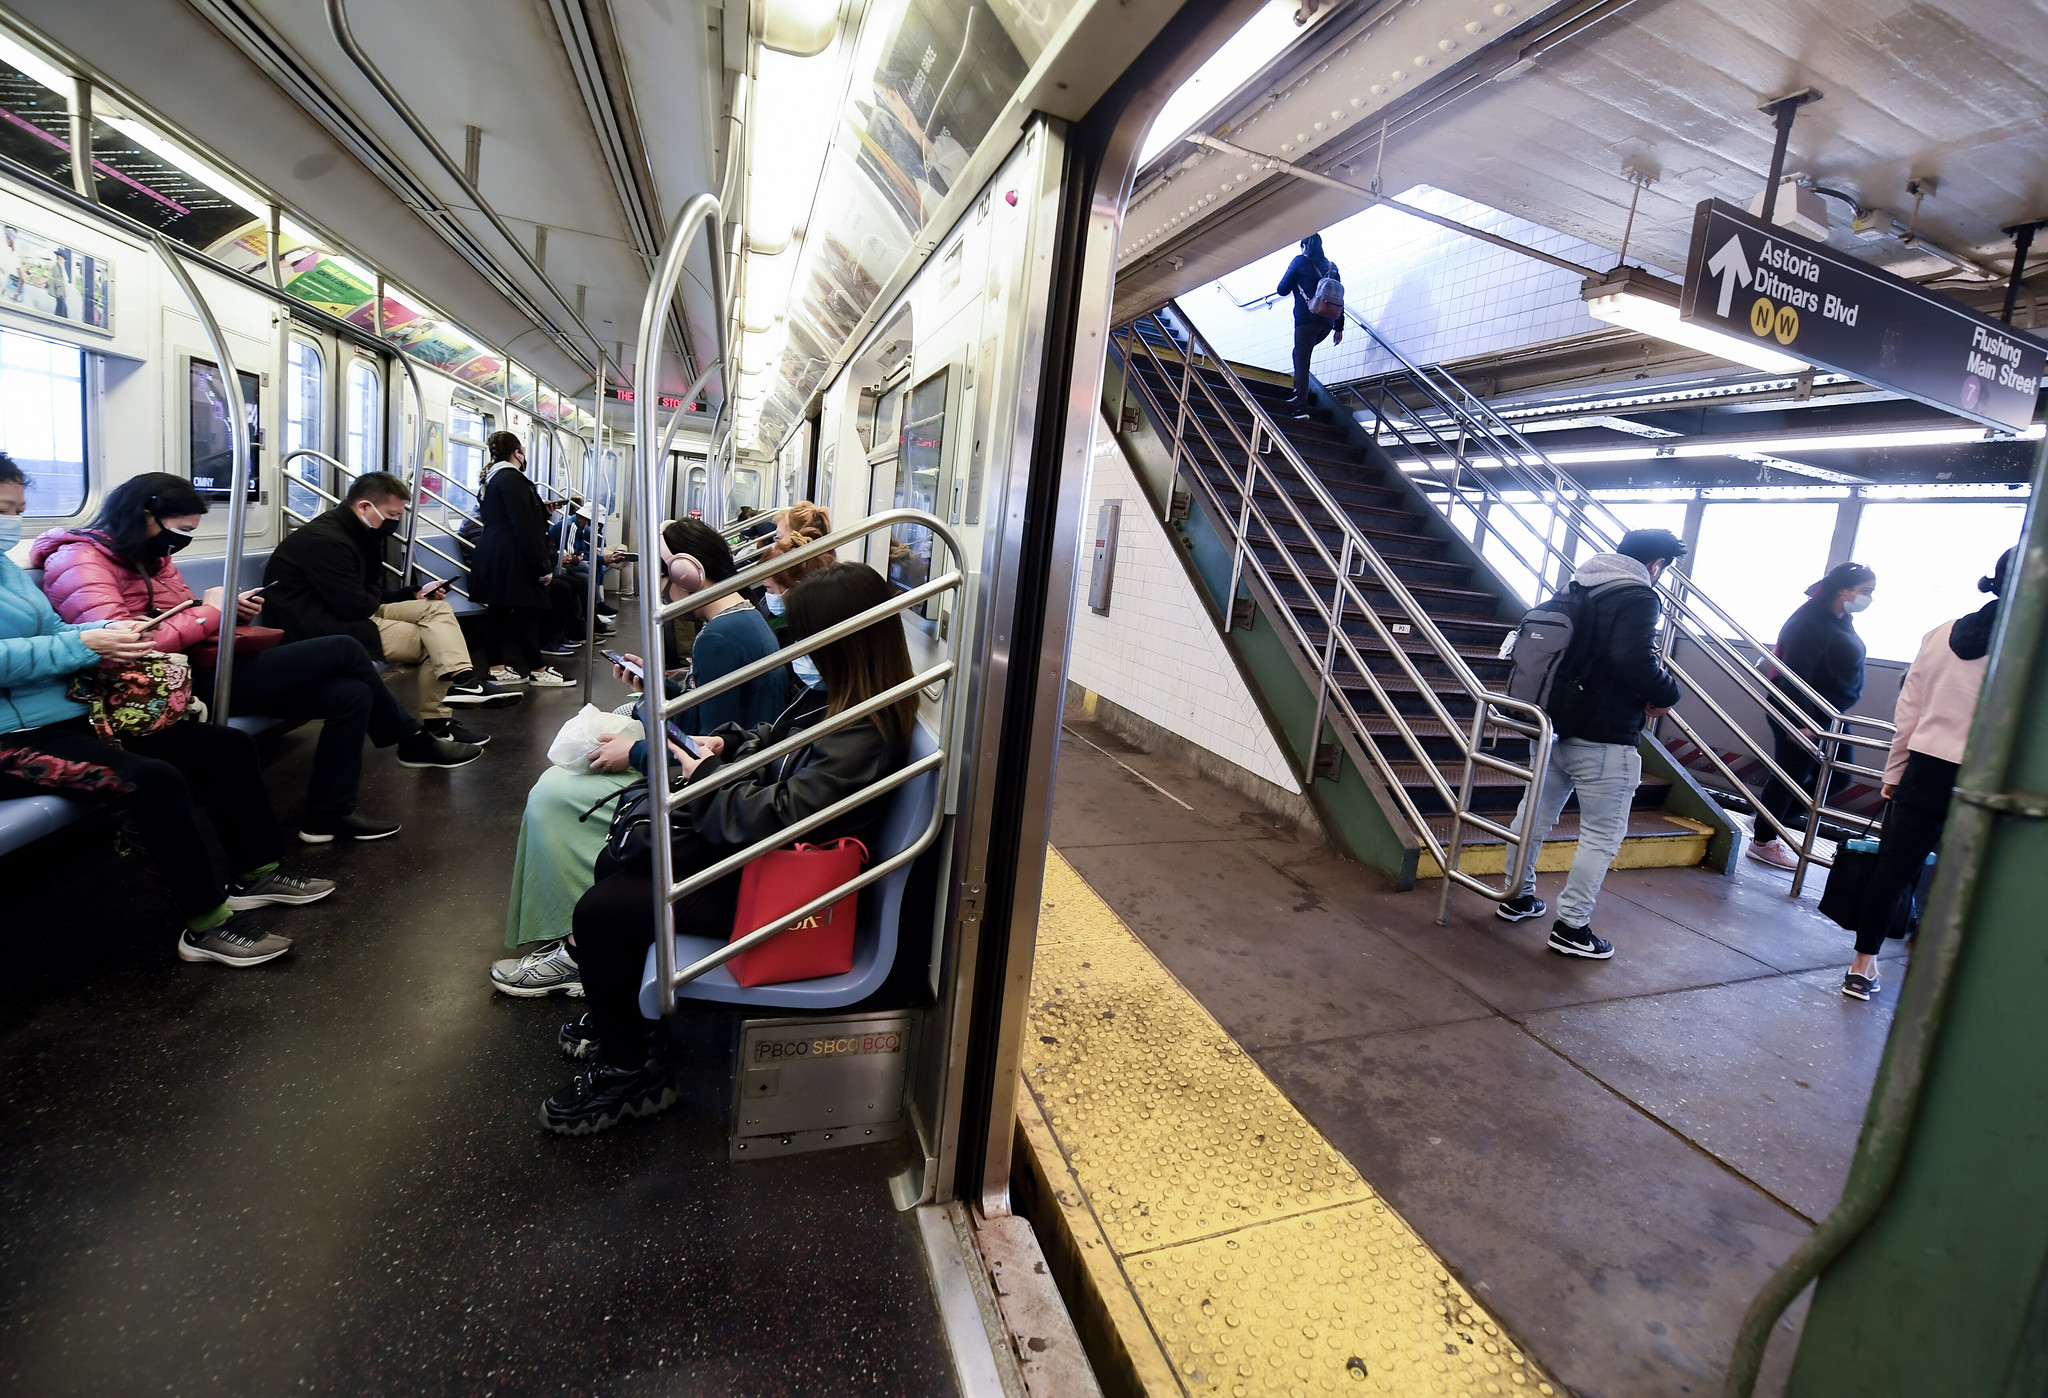 MTA Announces New York City Subway Carried Record Ridership for Second Consecutive Day, Long Island Rail Road Also Reached Post-Pandemic Ridership Record